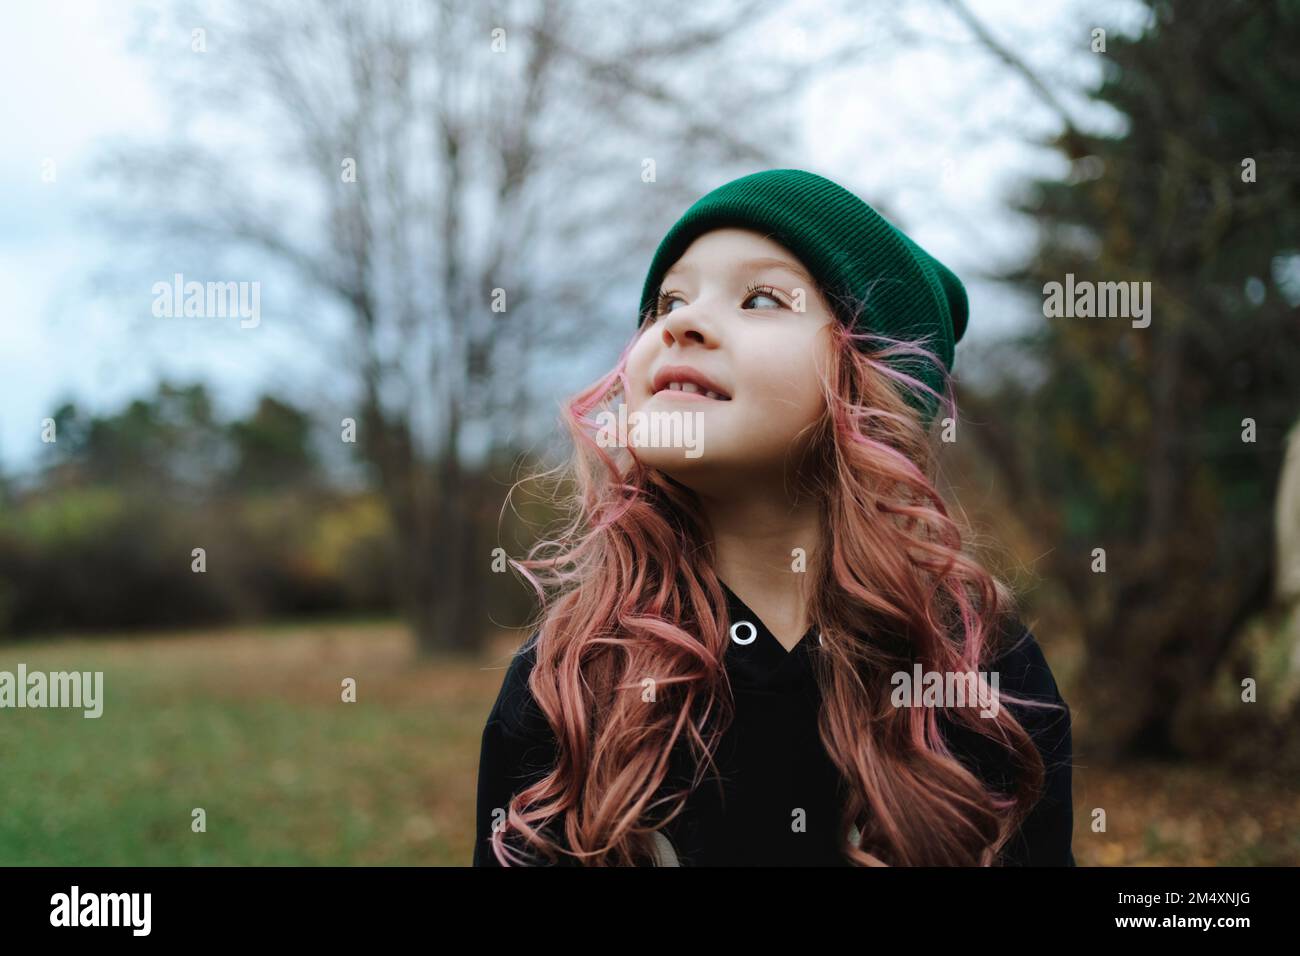 Smiling girl with pink hair wearing knit hat in park Stock Photo